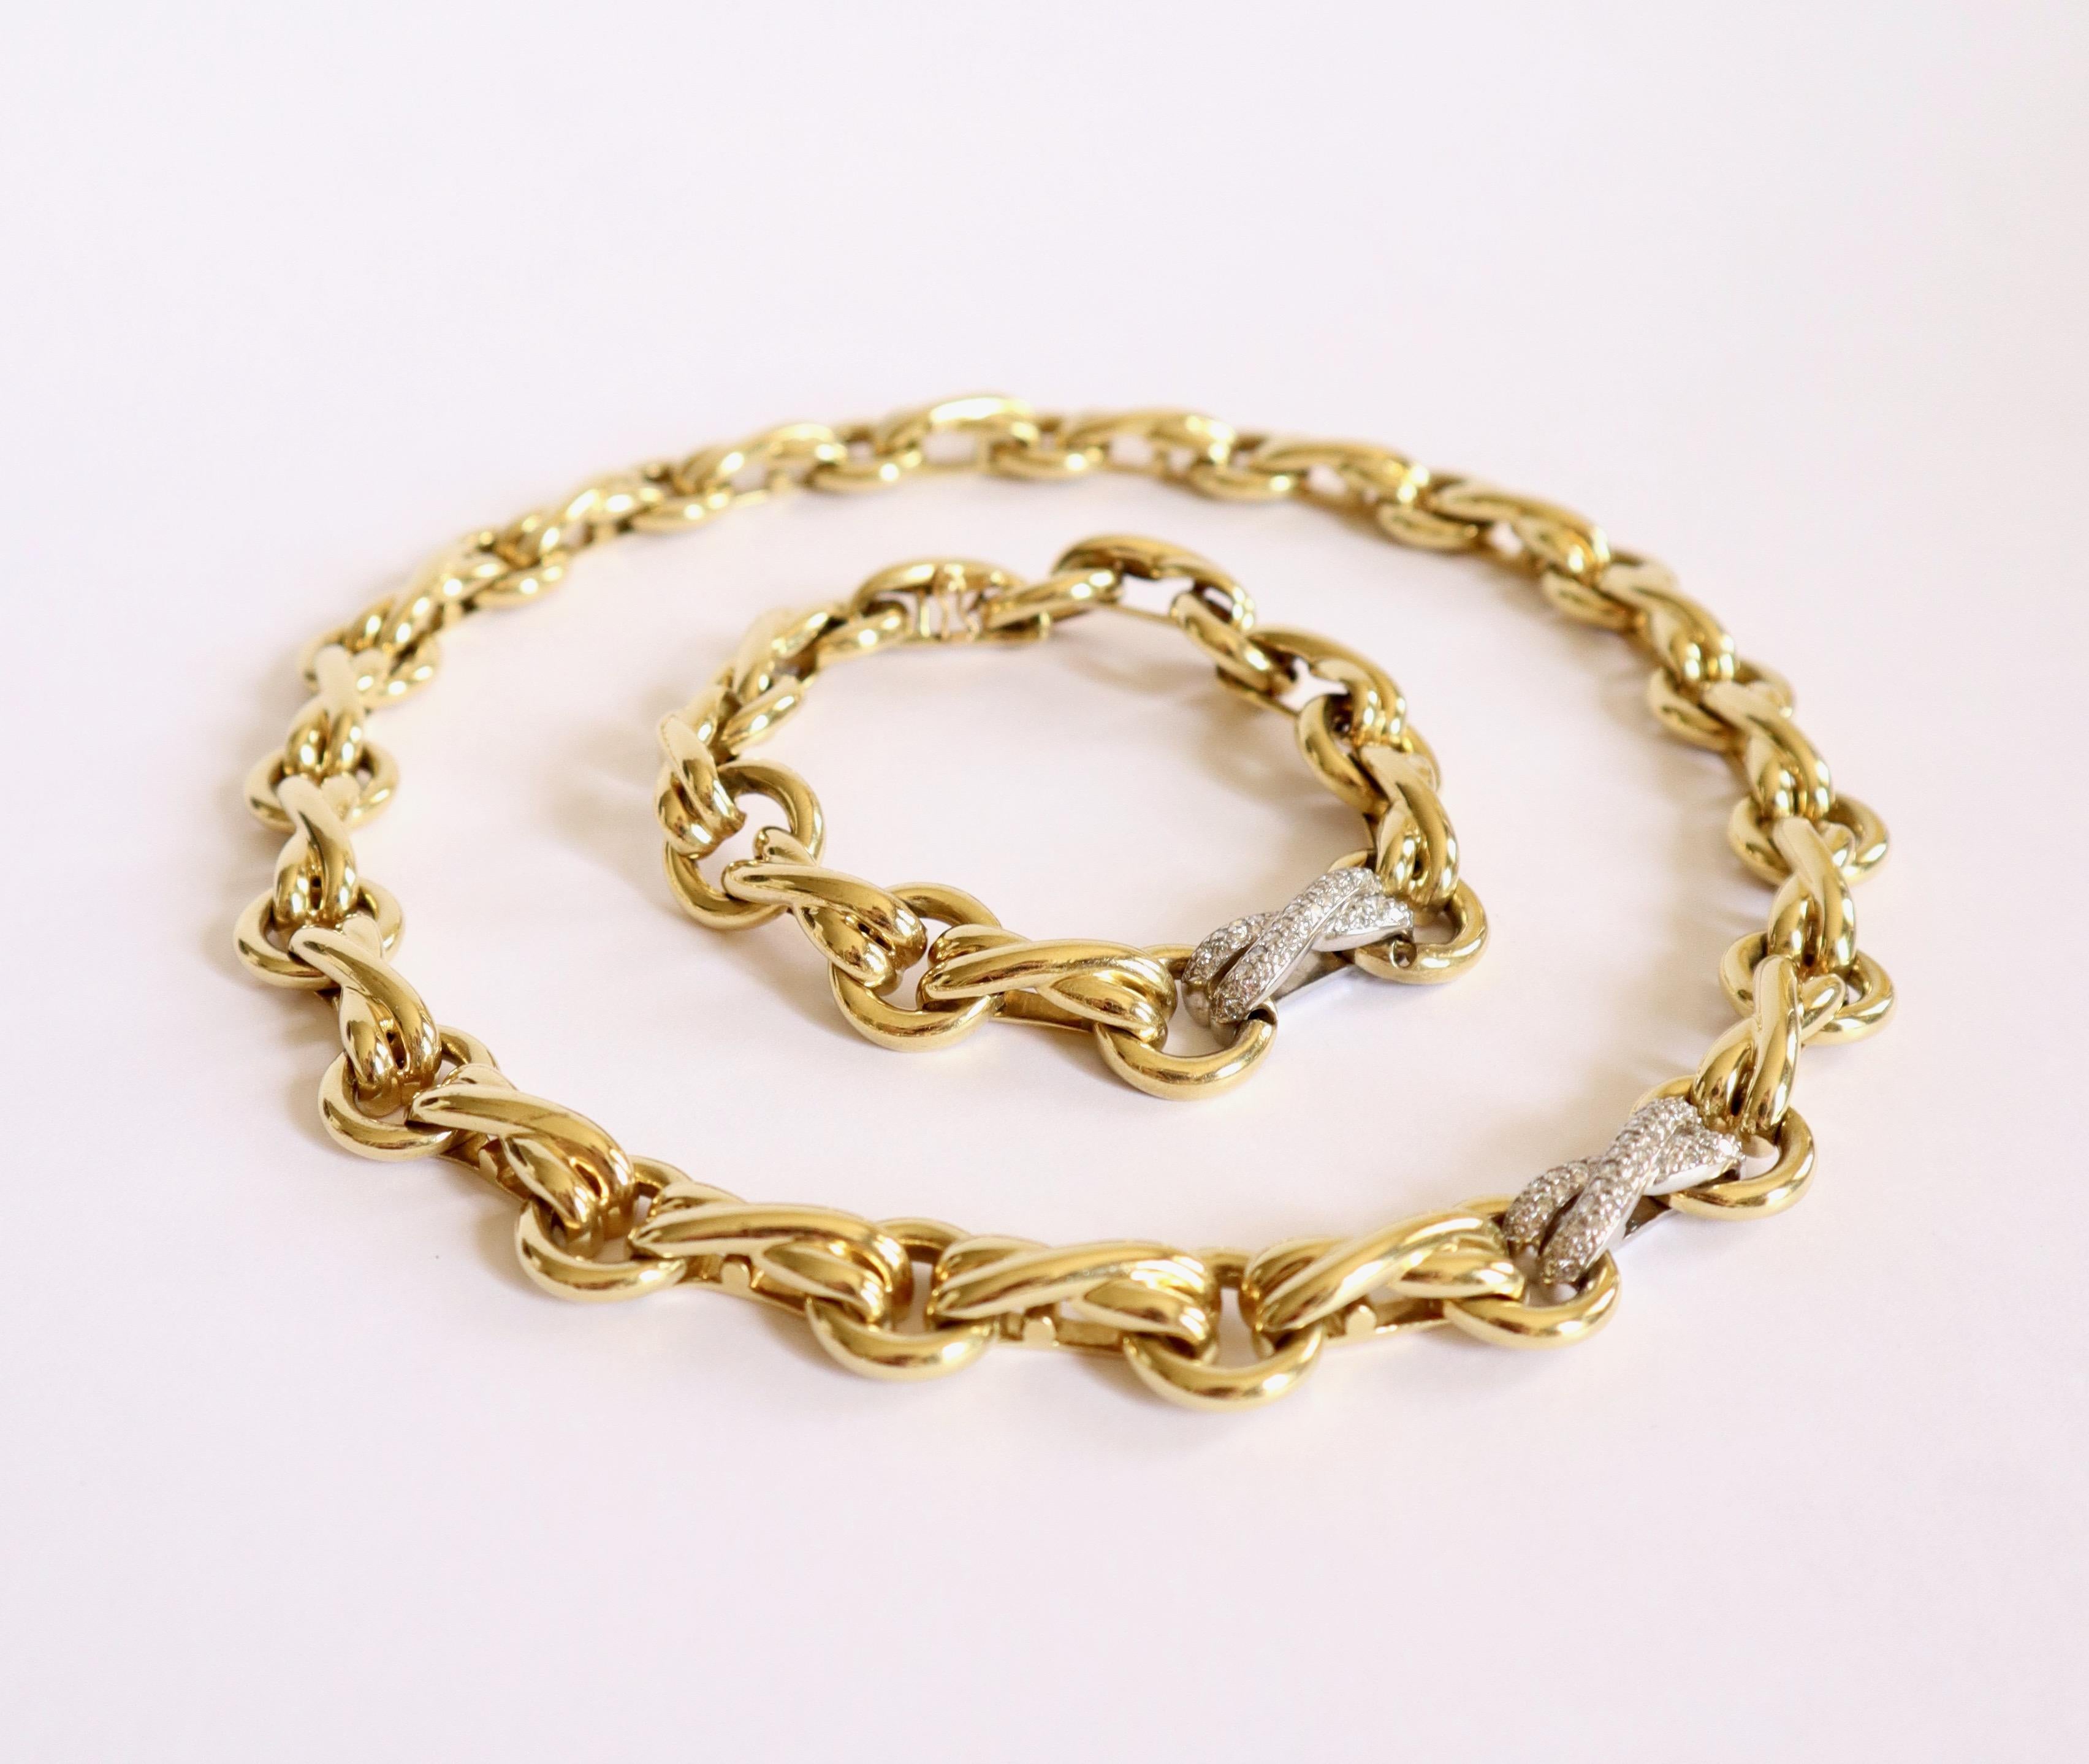 Tiffany's Paloma Picasso Bracelet and Necklace in 18kt Yellow Gold Platinum and Diamonds. Together they can form a long necklace.
Alternate Circles of interlaced double Links. A Platinum Link is paved with Diamonds for about 0.5 to 0.8 Carat on each